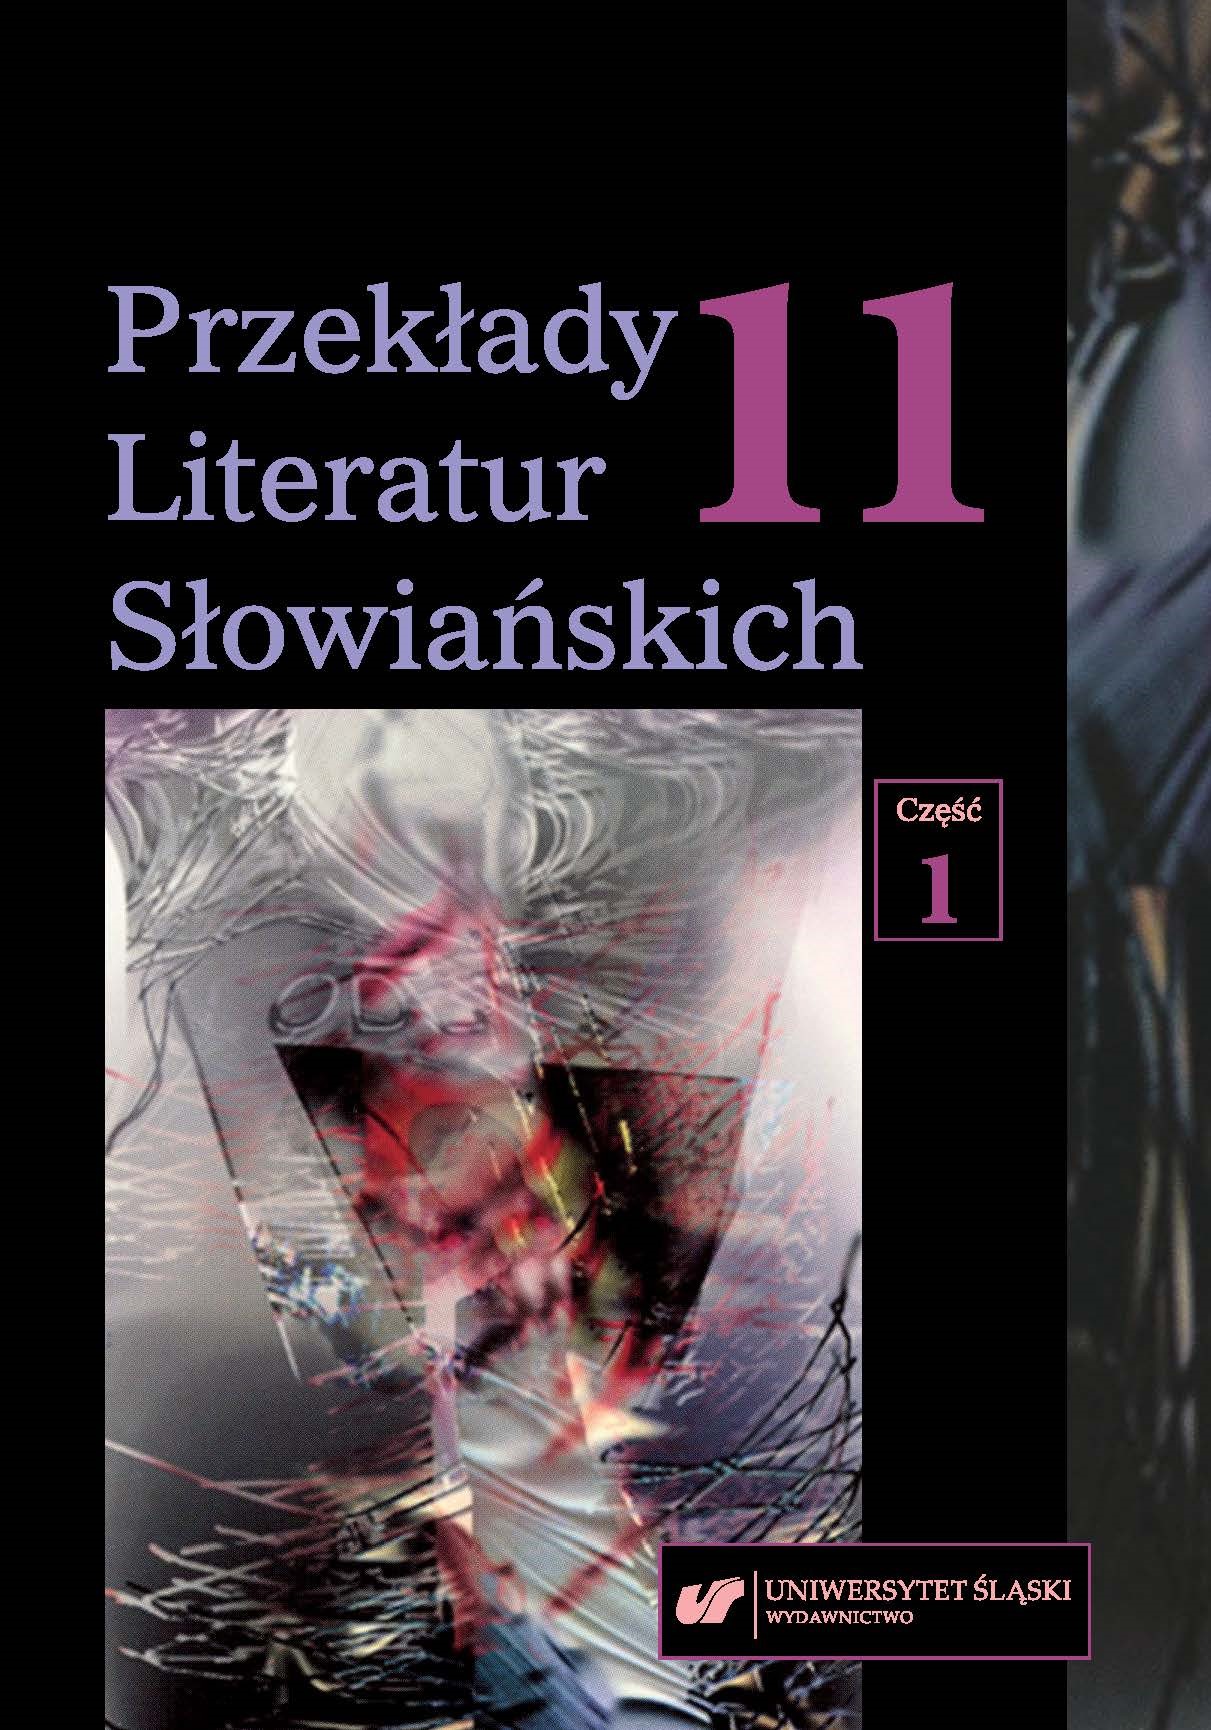 A Long Way to the Lithuanian Translation of Czesław Miłosz’s „A Treatise on Poetry” Cover Image